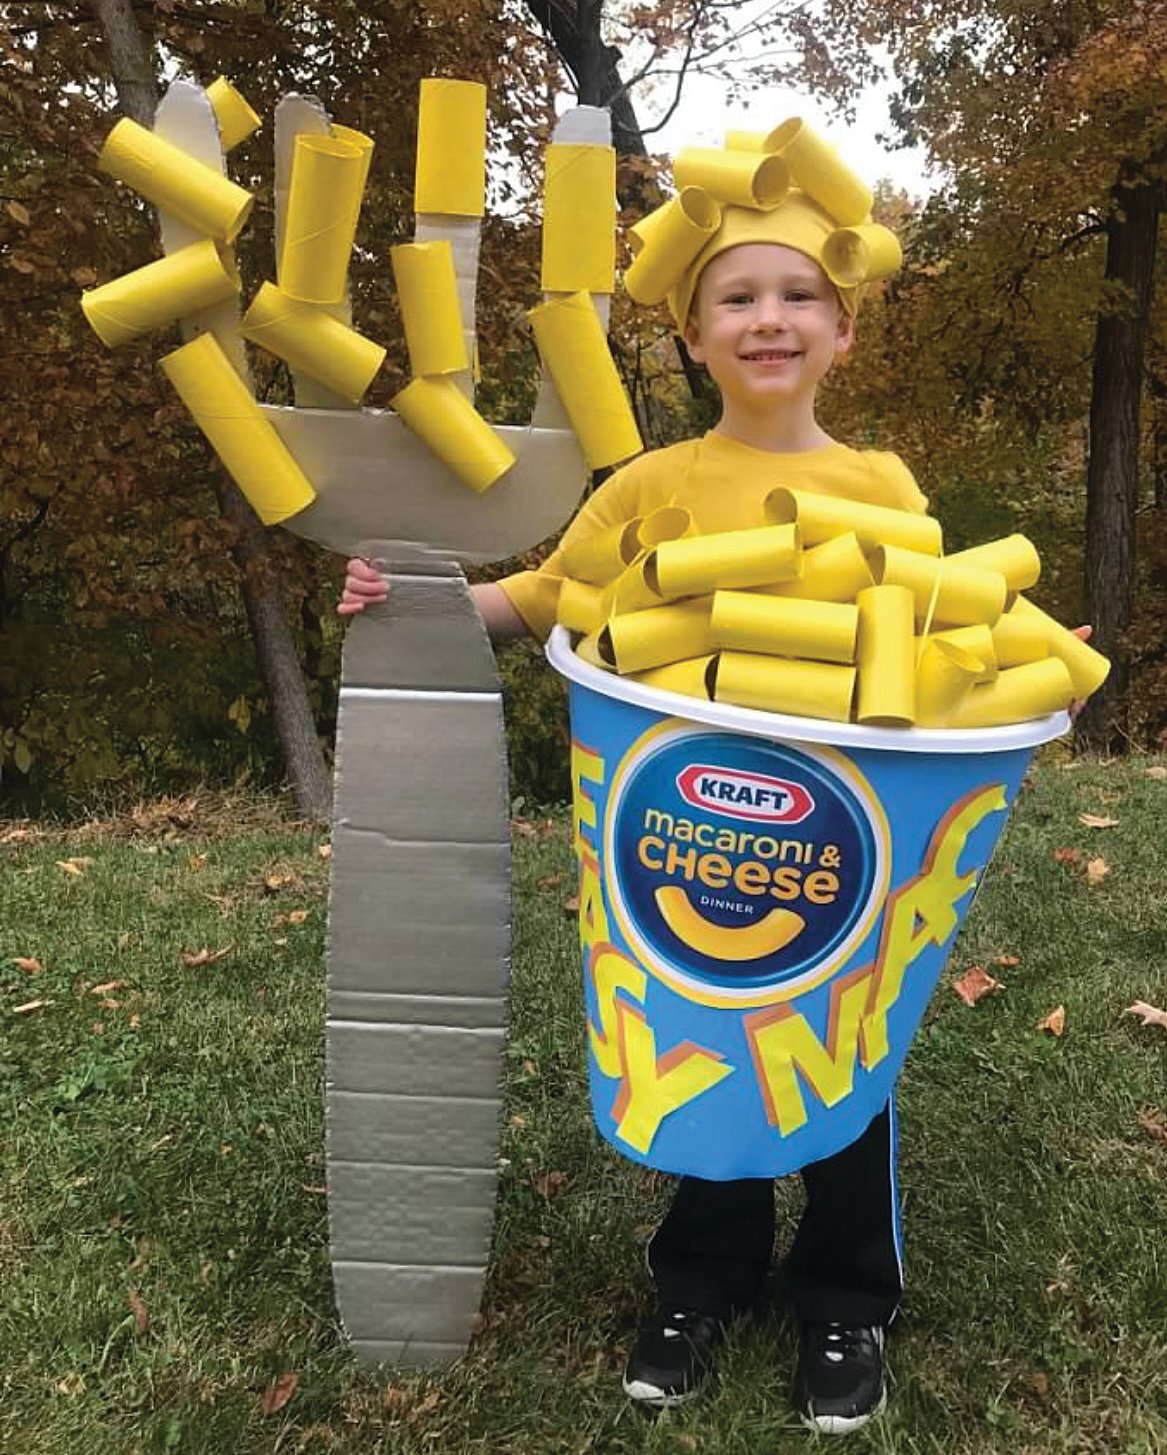 Easy Mac submitted by Darin Bowling is the 2021 Journal Review Halloween Costume Contest.